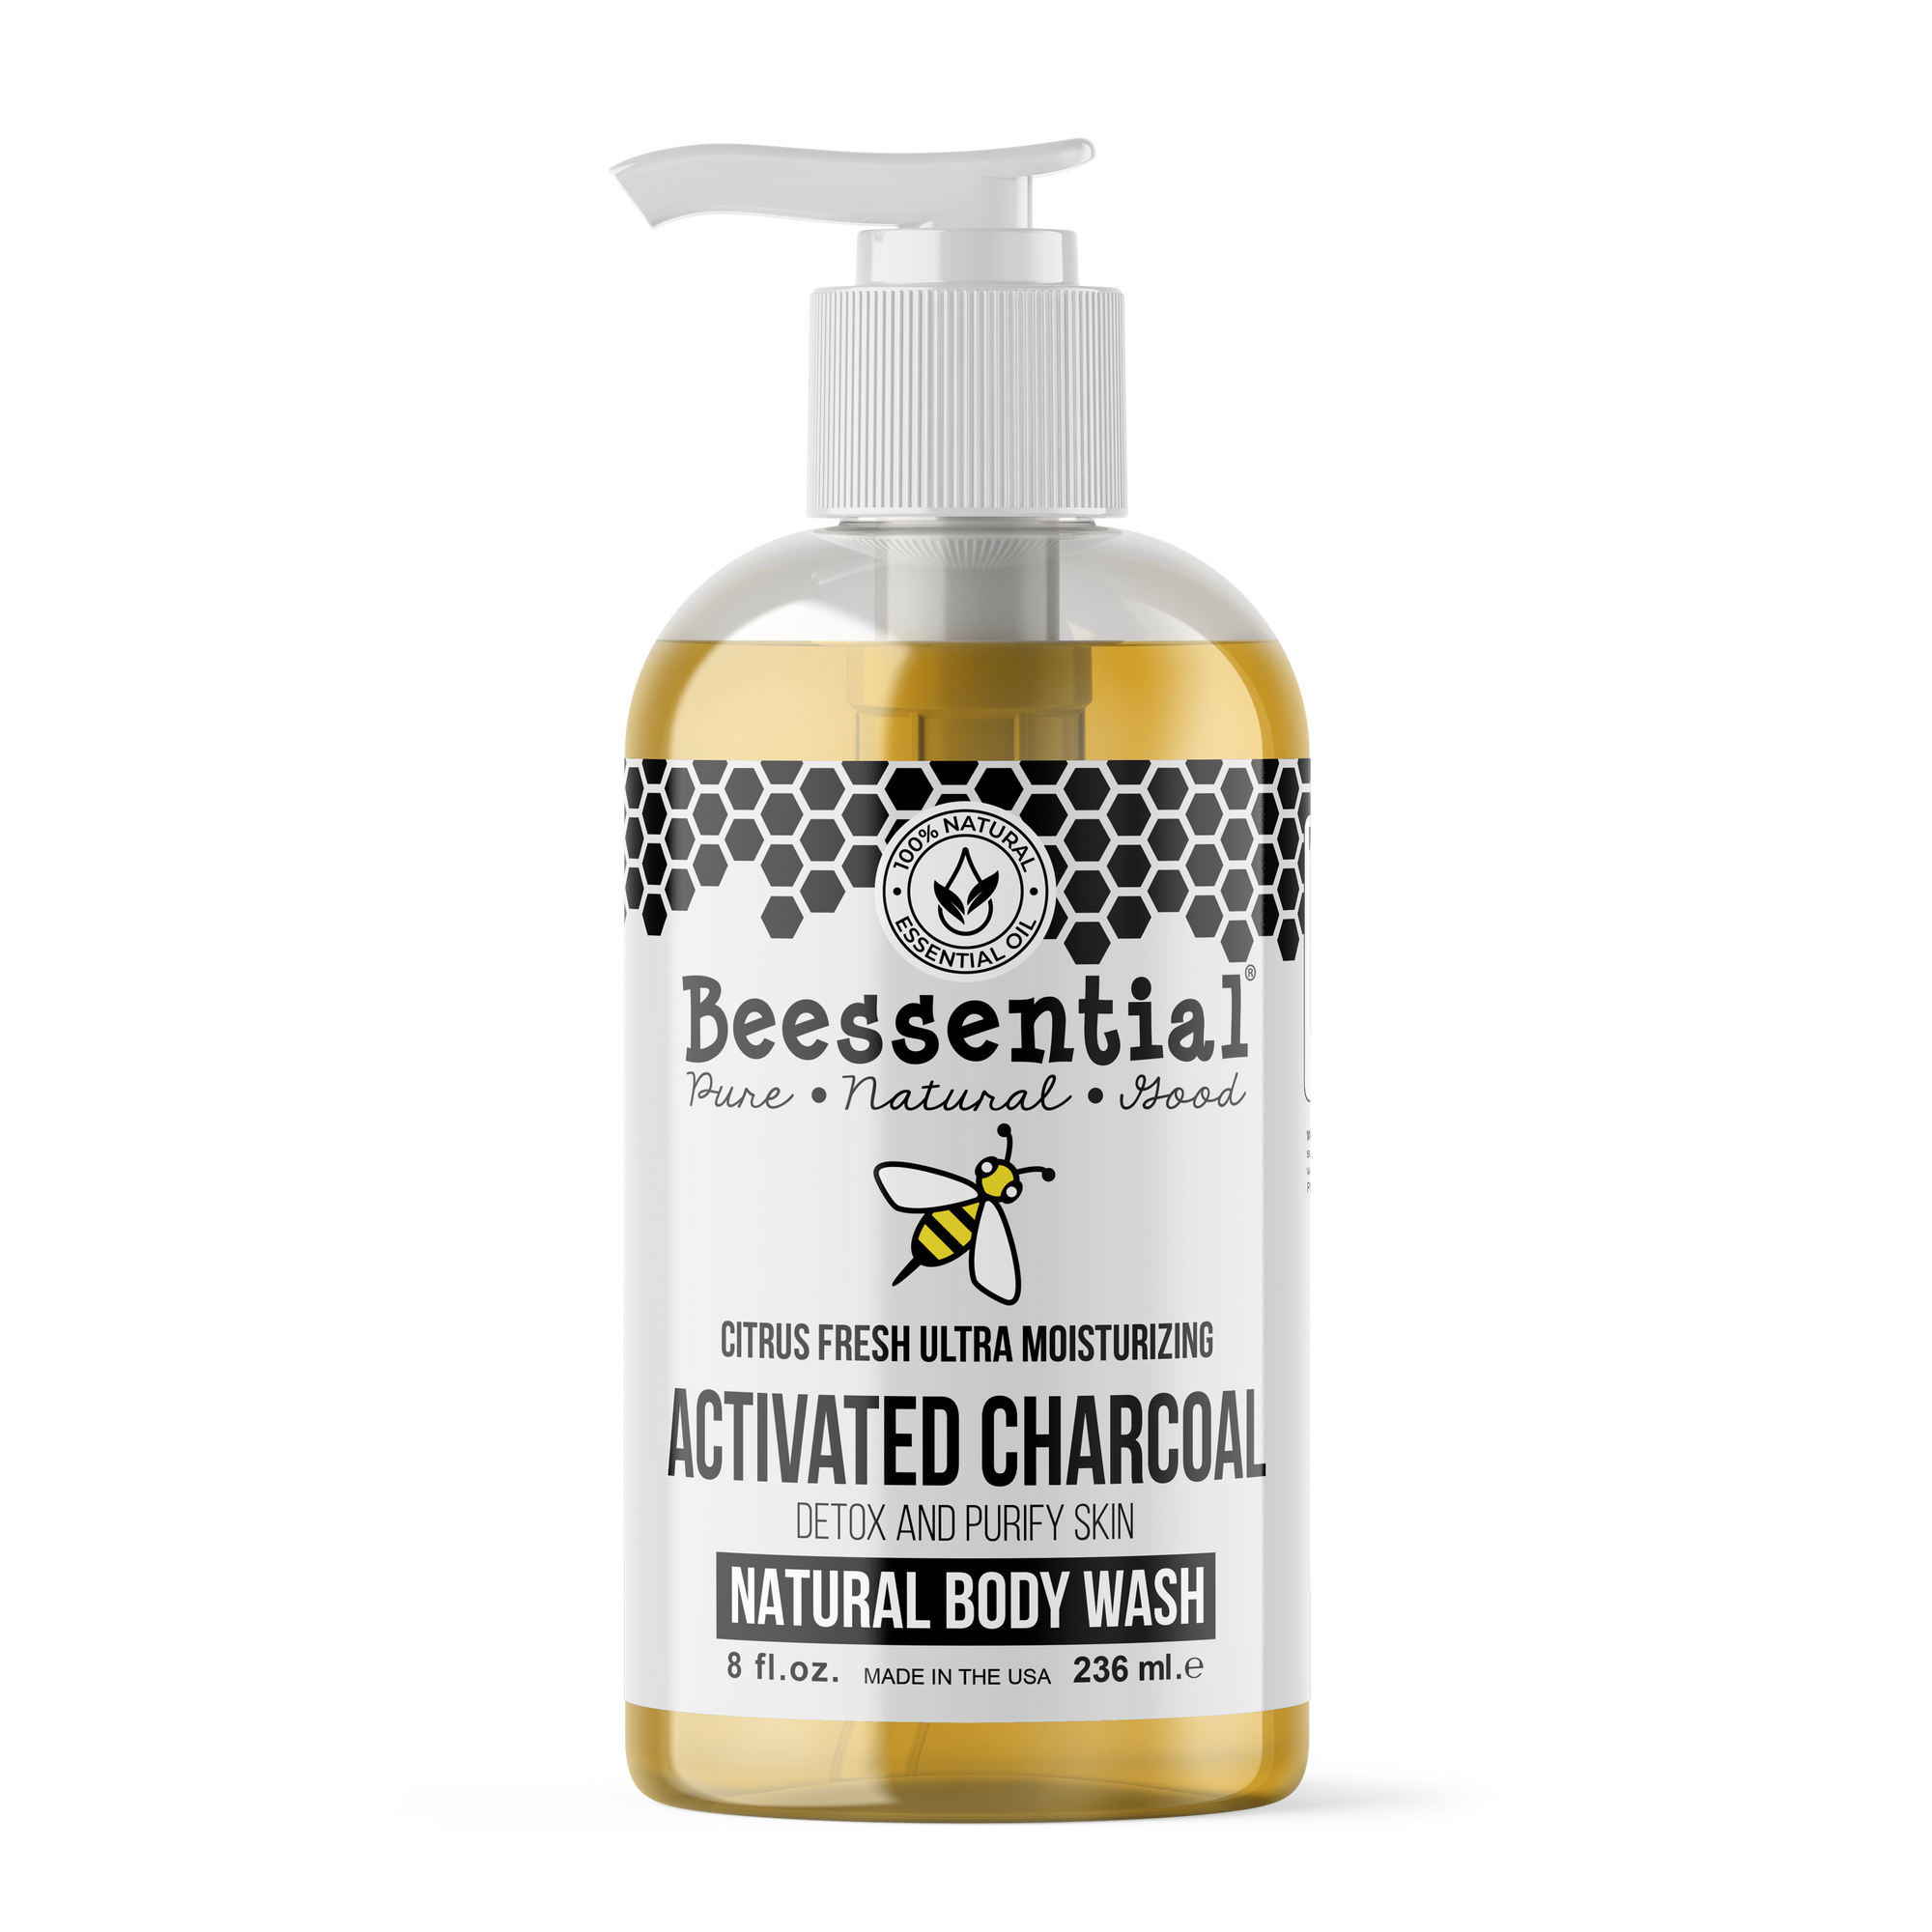  Beessential Activated Charcoal Body Wash. 
essential oil fragrance
Coconut, Olive, and Hemp Oil. 
